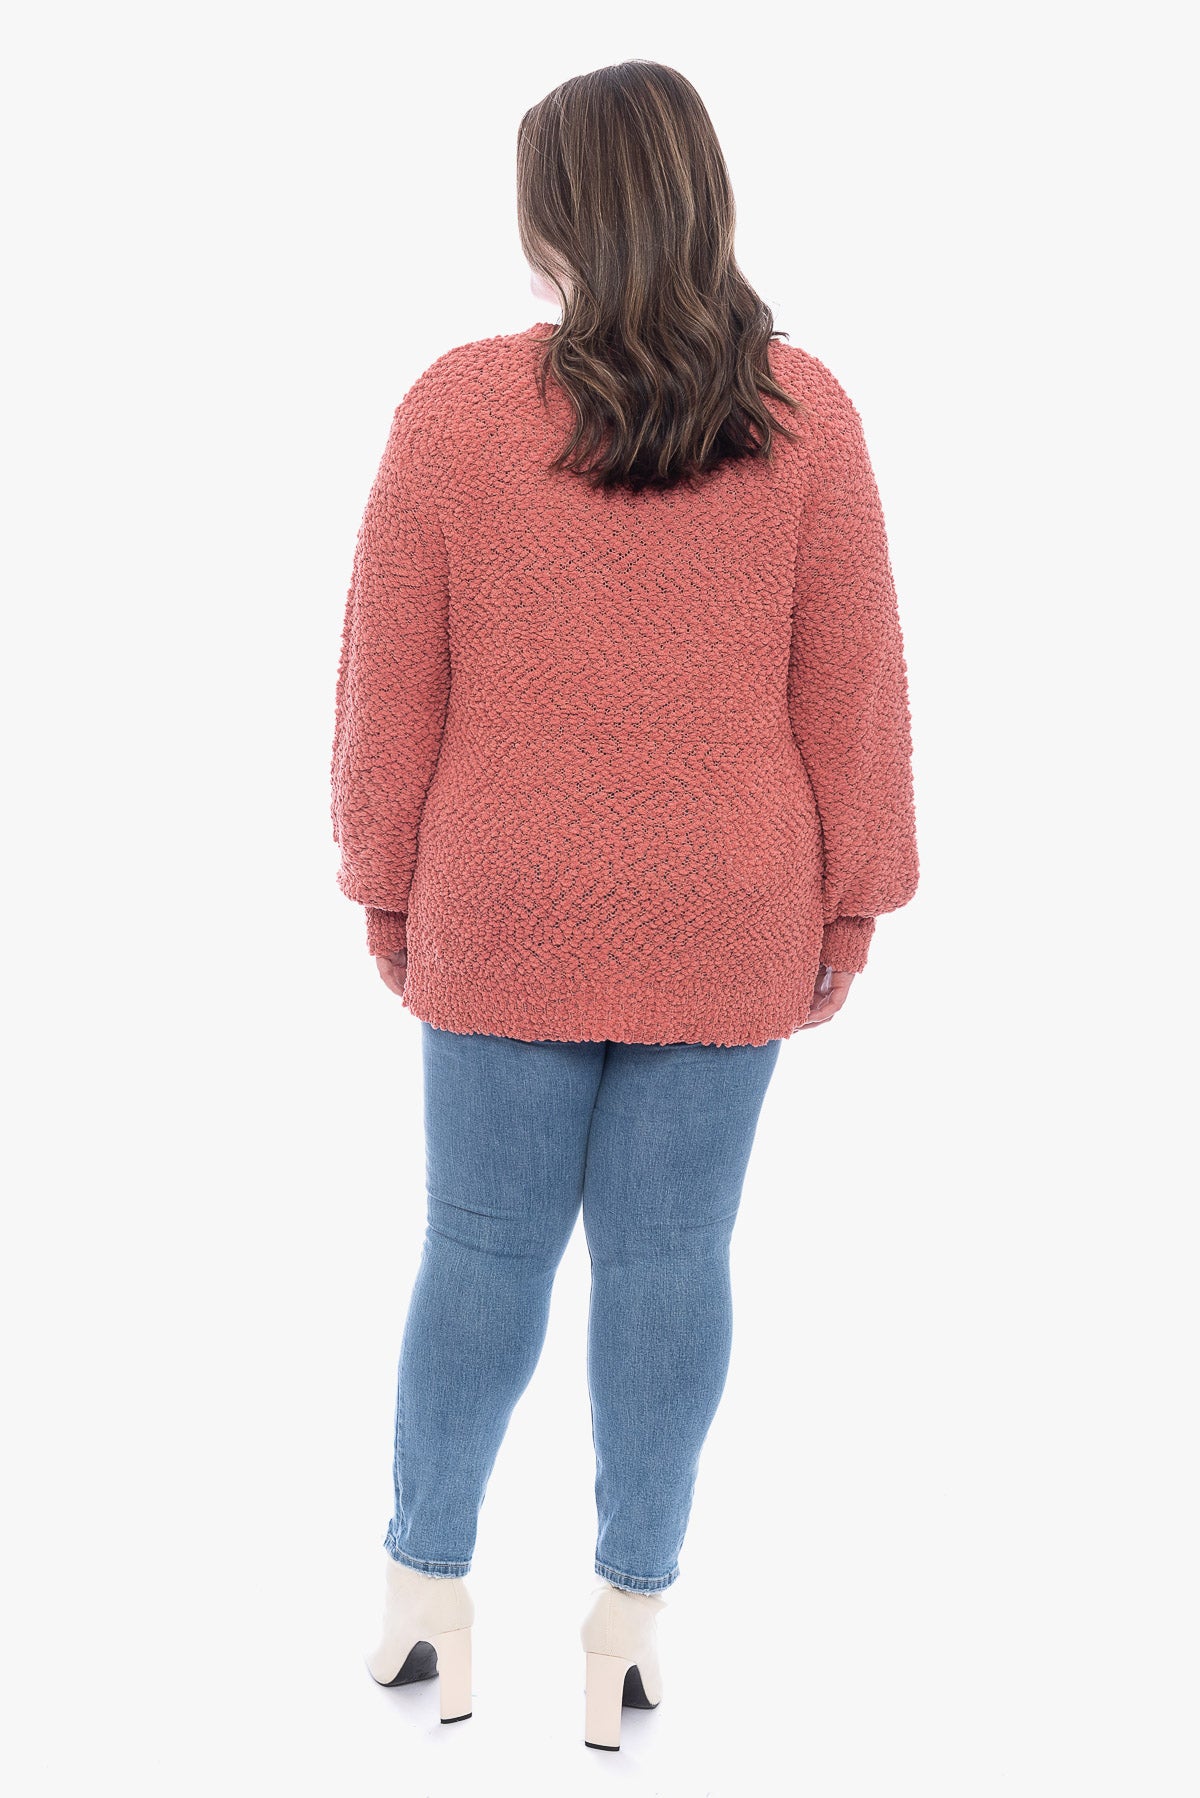 HARLOW popcorn knitted sweater